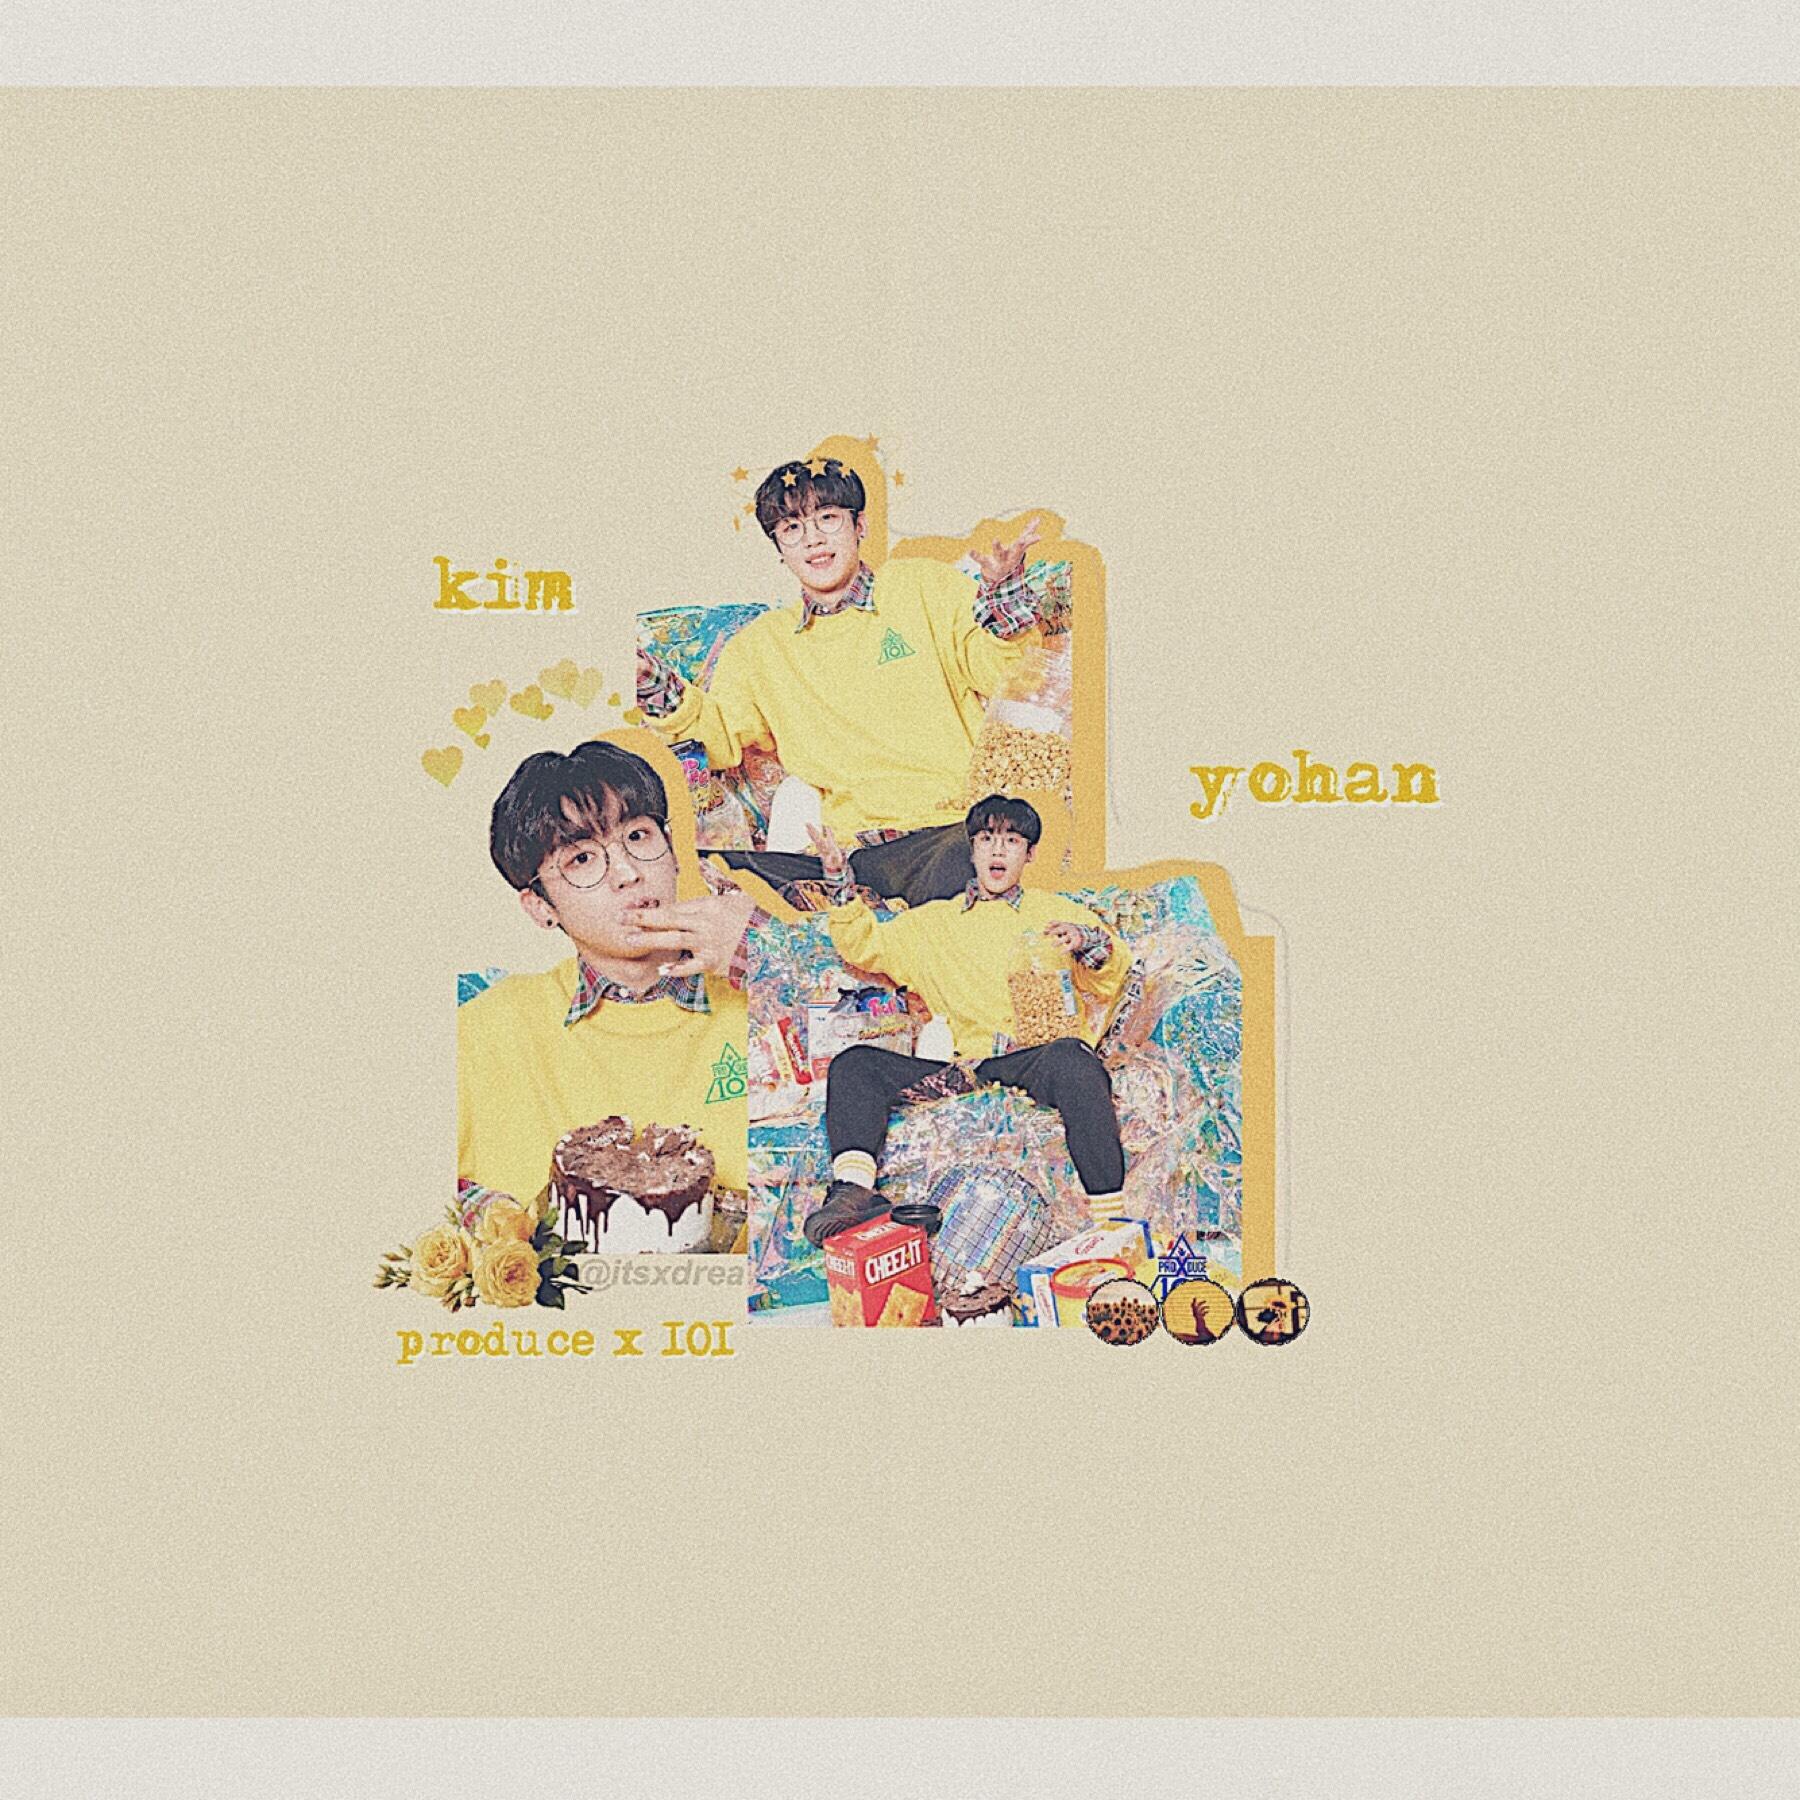 ⚡️
• kim yohan // produce x 101 •
> edit request for @Whoop_Whoop127 <
i hope you enjoy this one !! 
ooh i forgot to say, but i finally watched spider-man: far from home a few days ago and it was so good 10/10 :,)